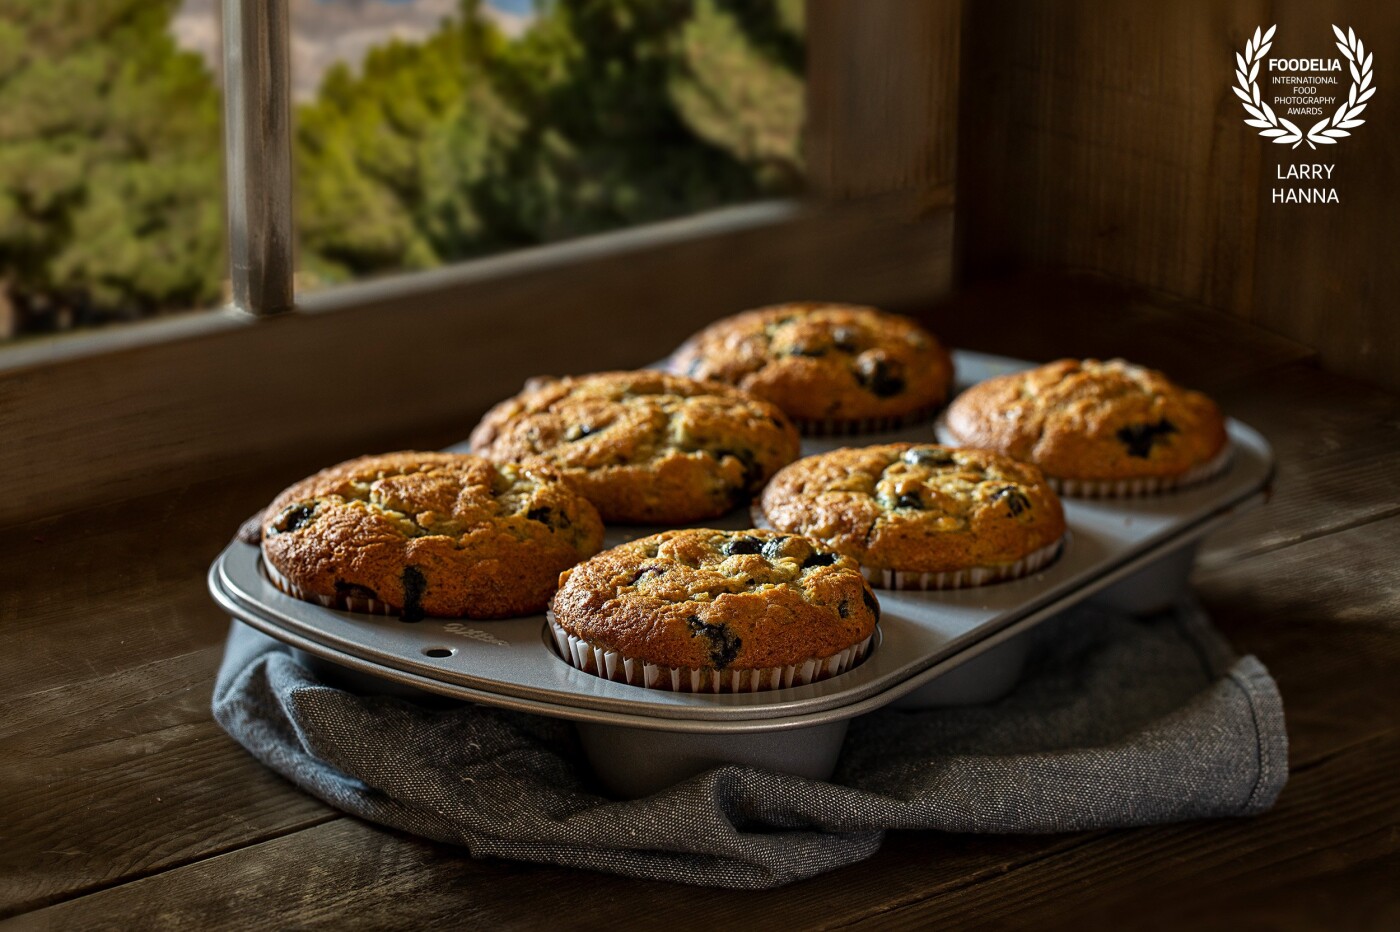 I made these banana/blueberry muffins for my family's consumption and decided to create a photograph of them.  The image was created in my kitchen using natural light on a set I made.<br />
